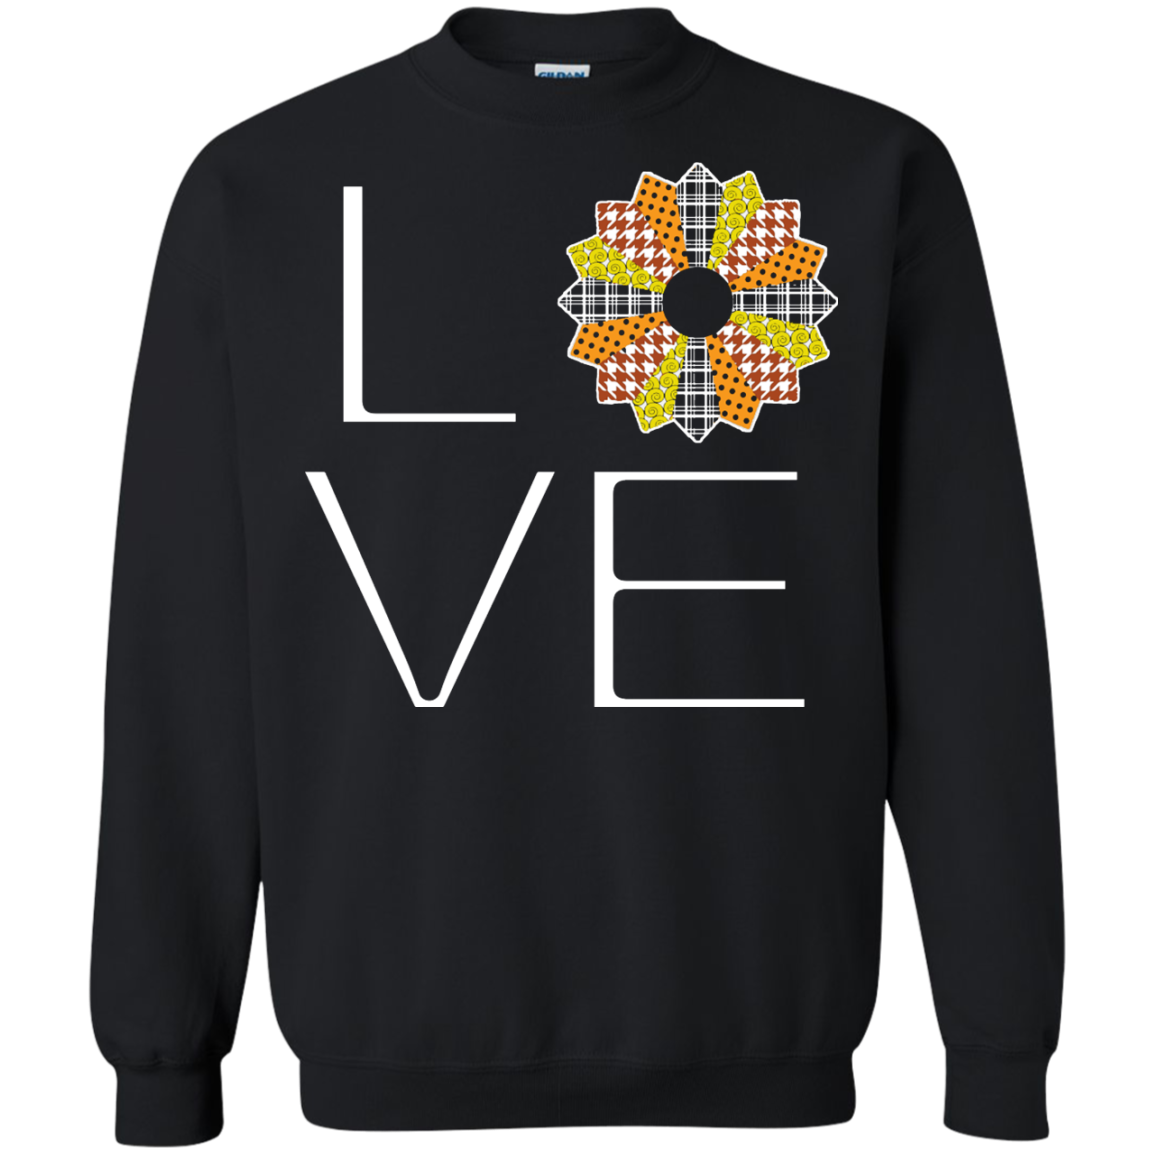 LOVE Quilting (Fall Colors) Crewneck Sweatshirts - Crafter4Life - 2